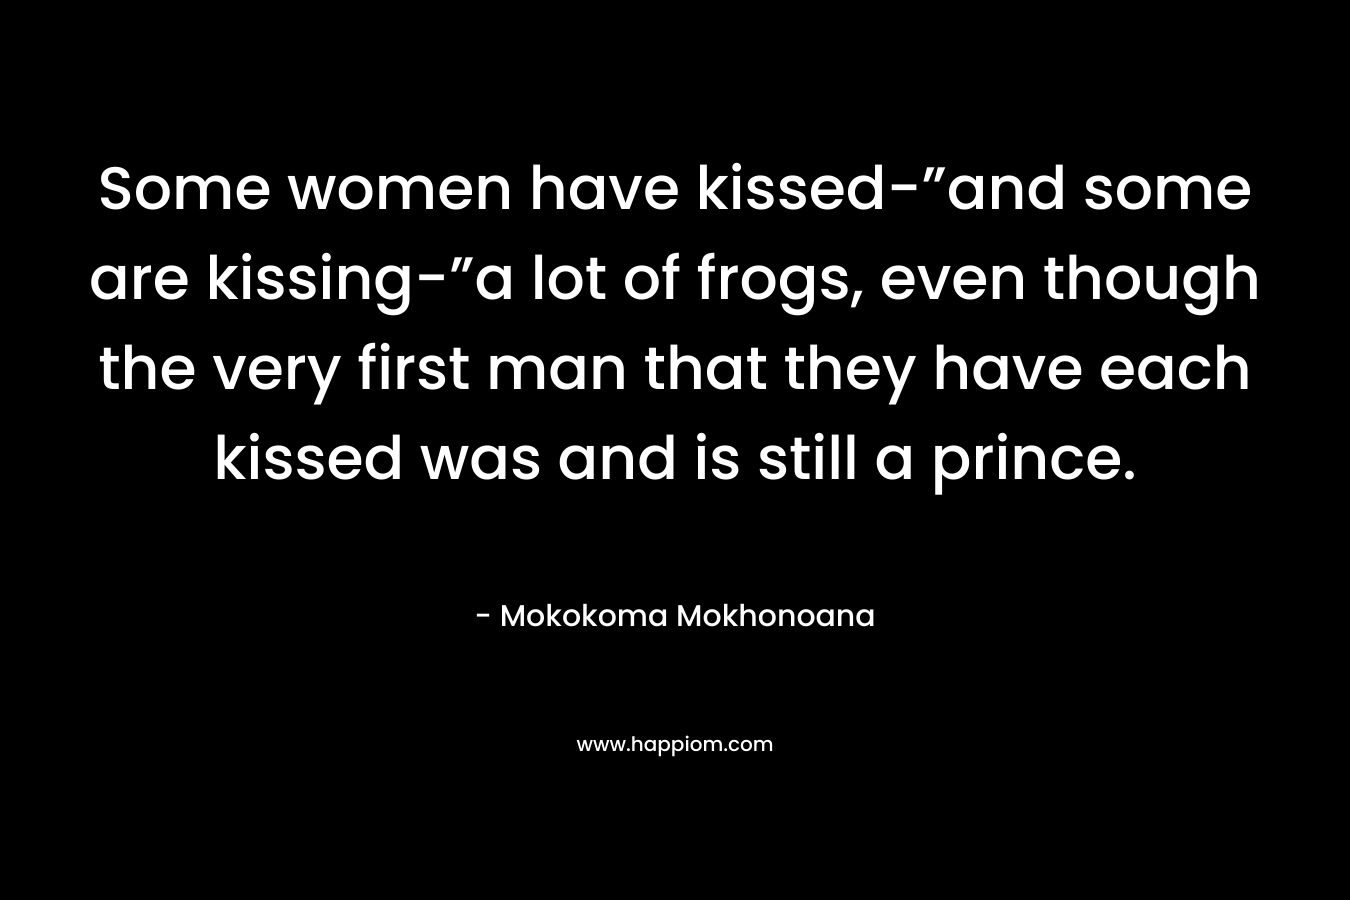 Some women have kissed-”and some are kissing-”a lot of frogs, even though the very first man that they have each kissed was and is still a prince.